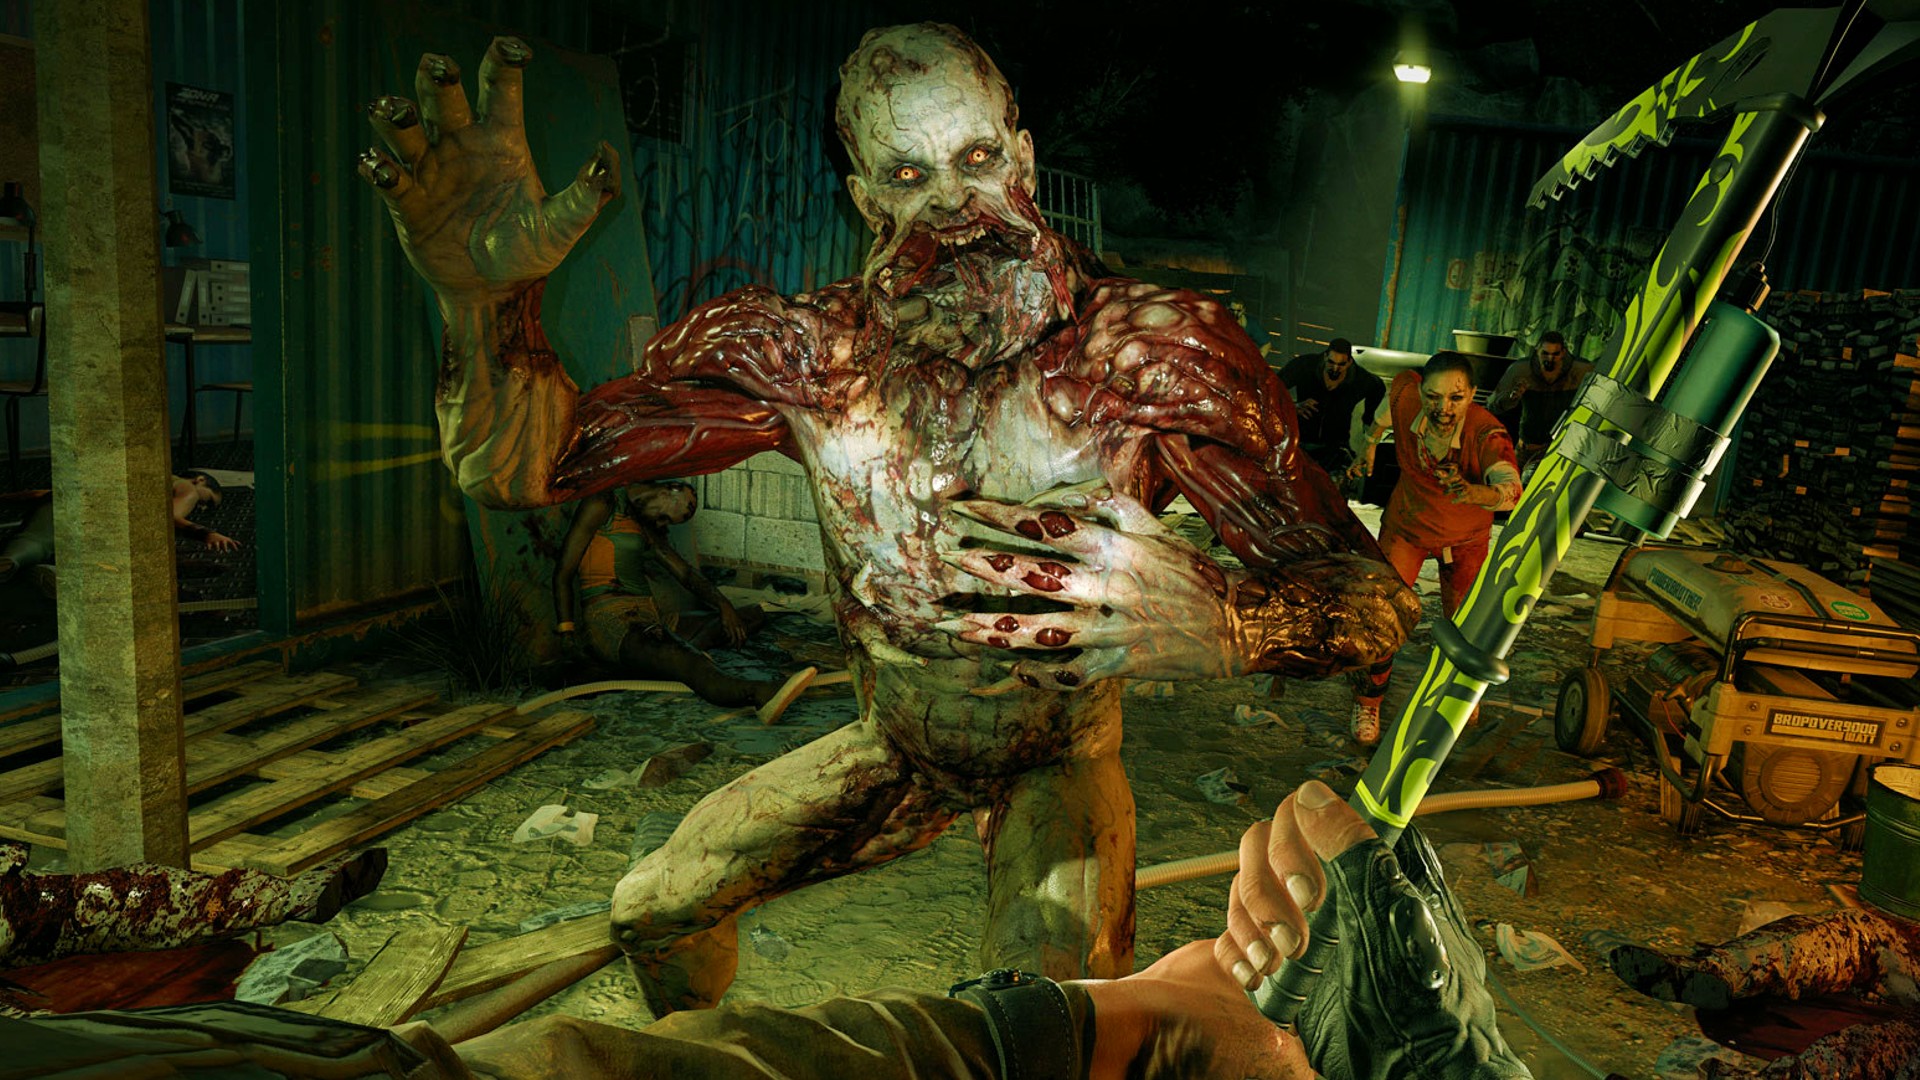 One of the best zombie games – no, the other one